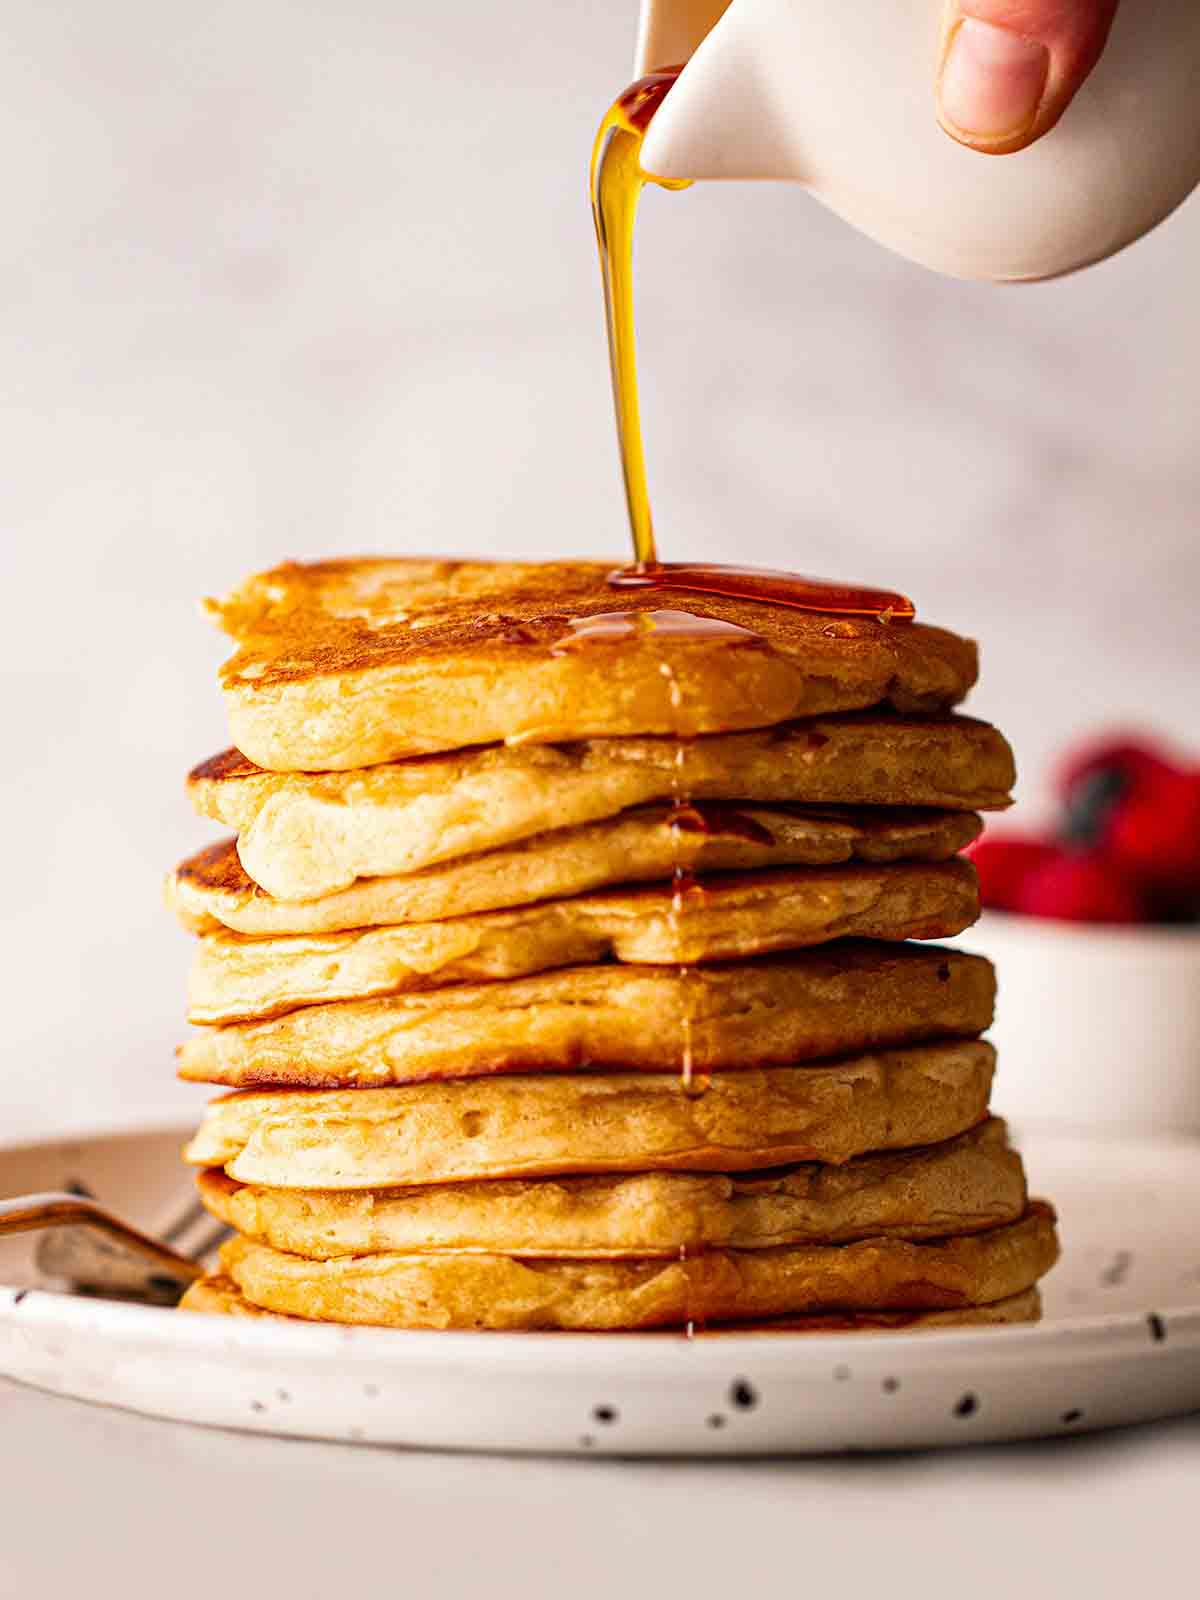 A big stack of American Pancakes on a plate with maple syrup being drizzled over the top from a jug.